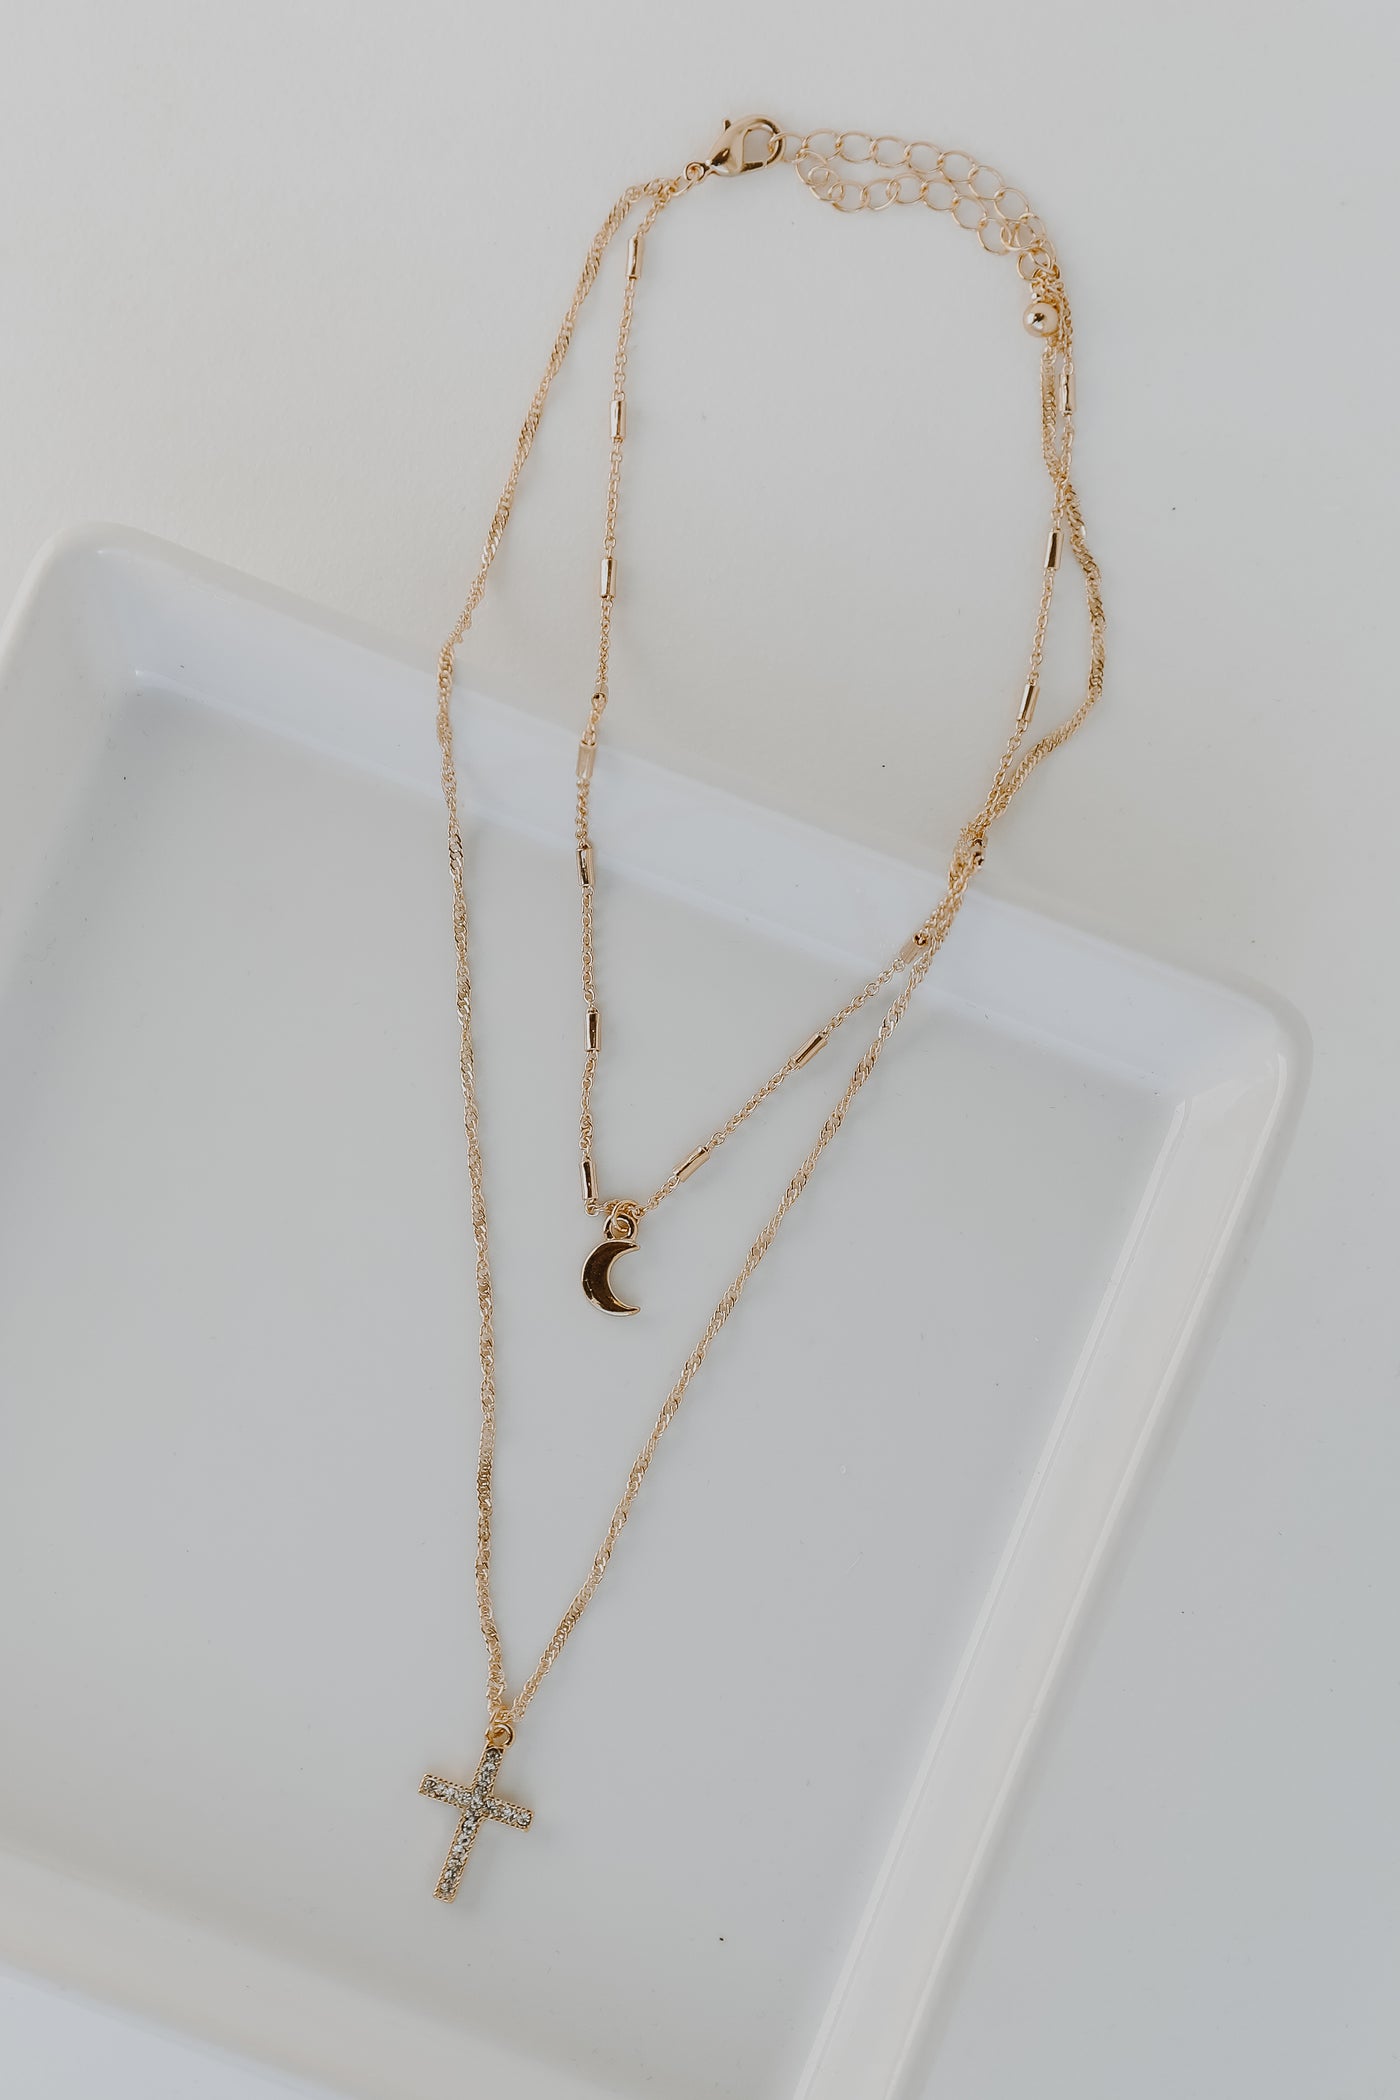 Gold Moon + Cross Layered Necklace flat lay